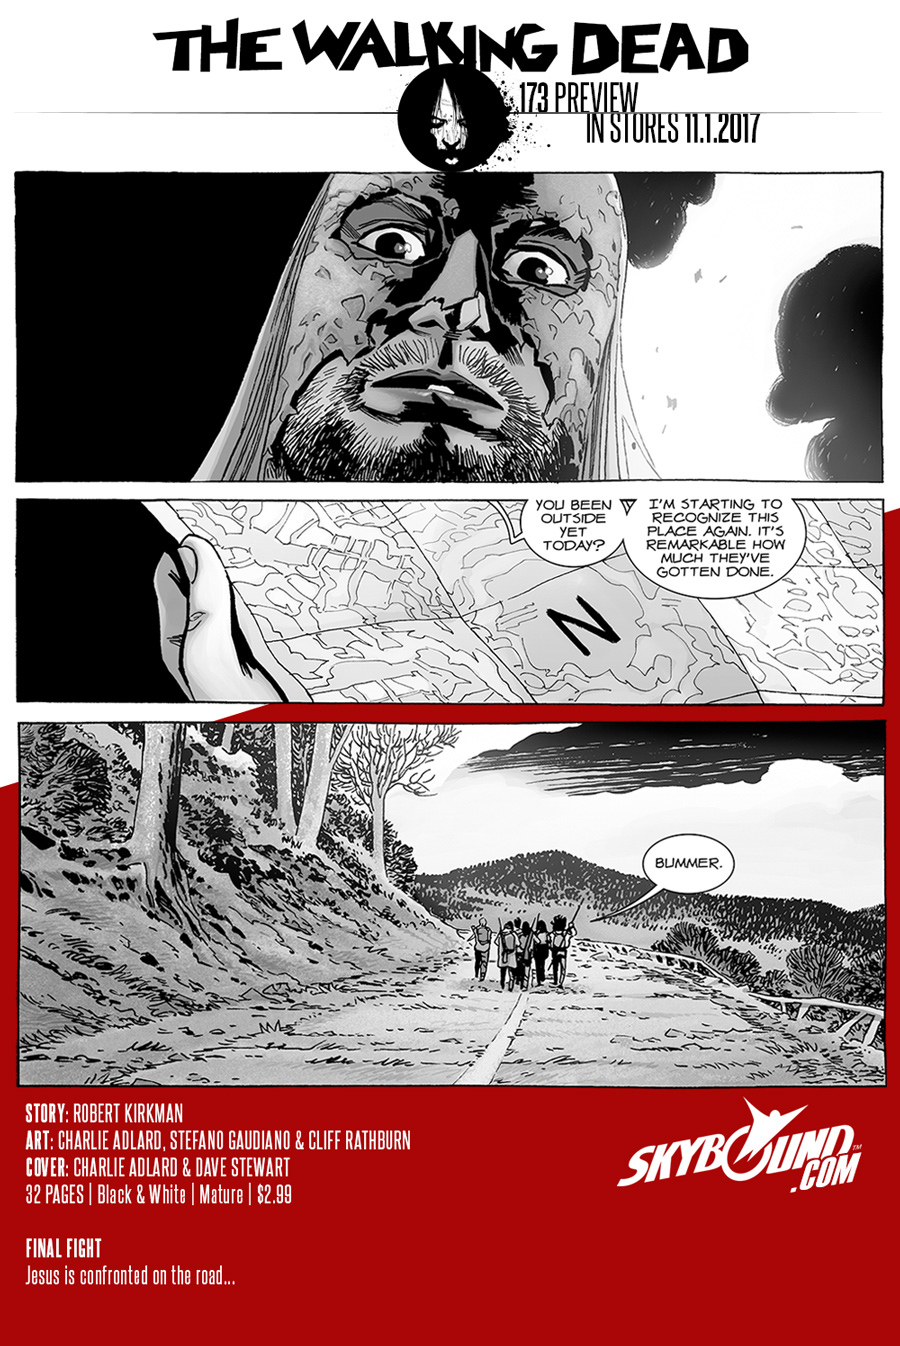 the-walking-dead-173-preview